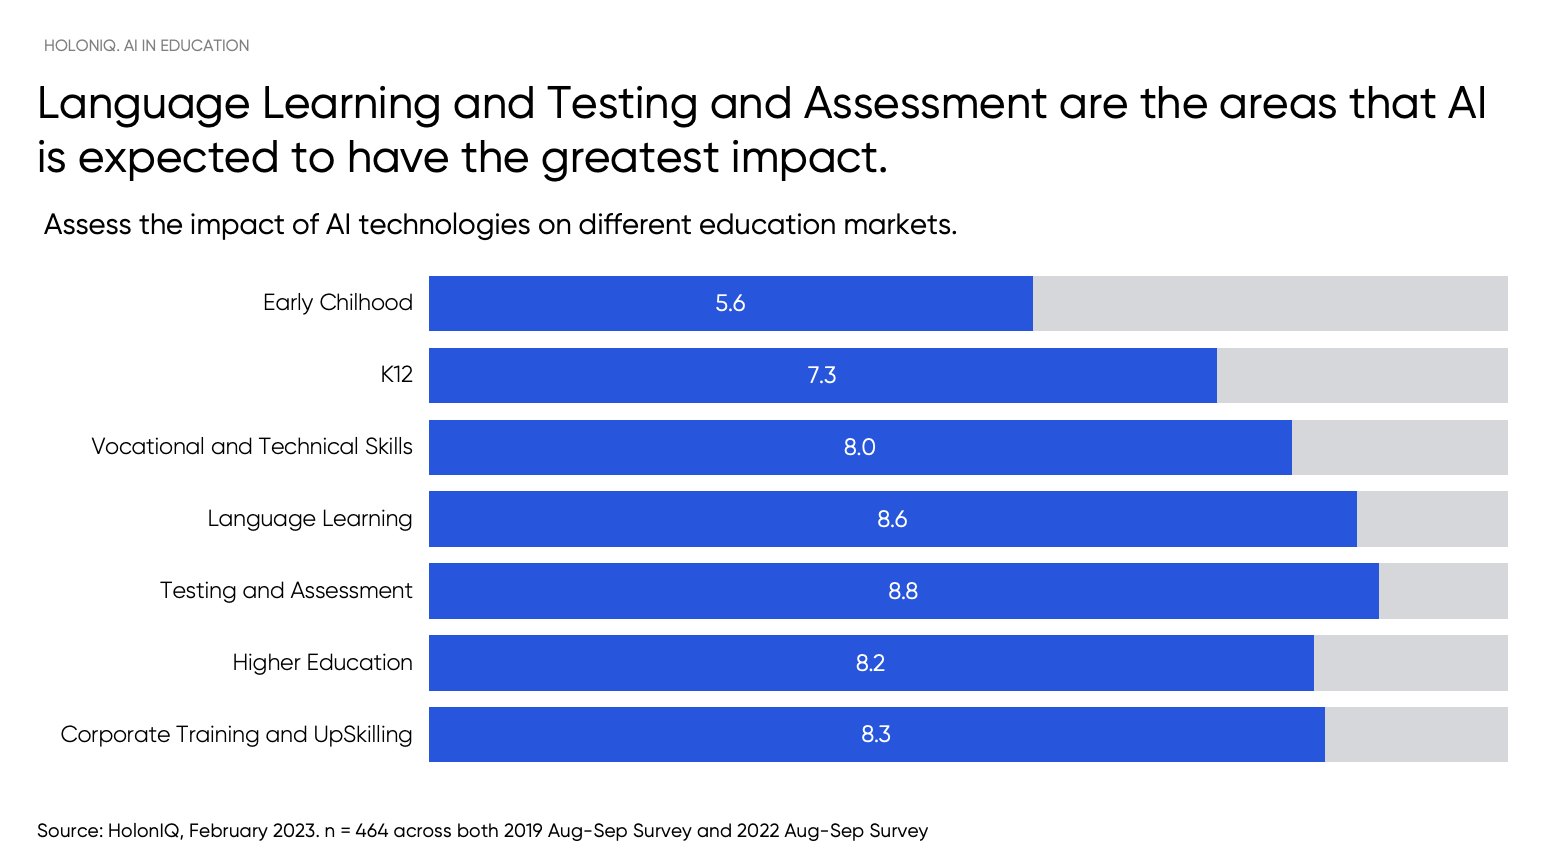 Holoniq survey results on impact of AI on learning and testing